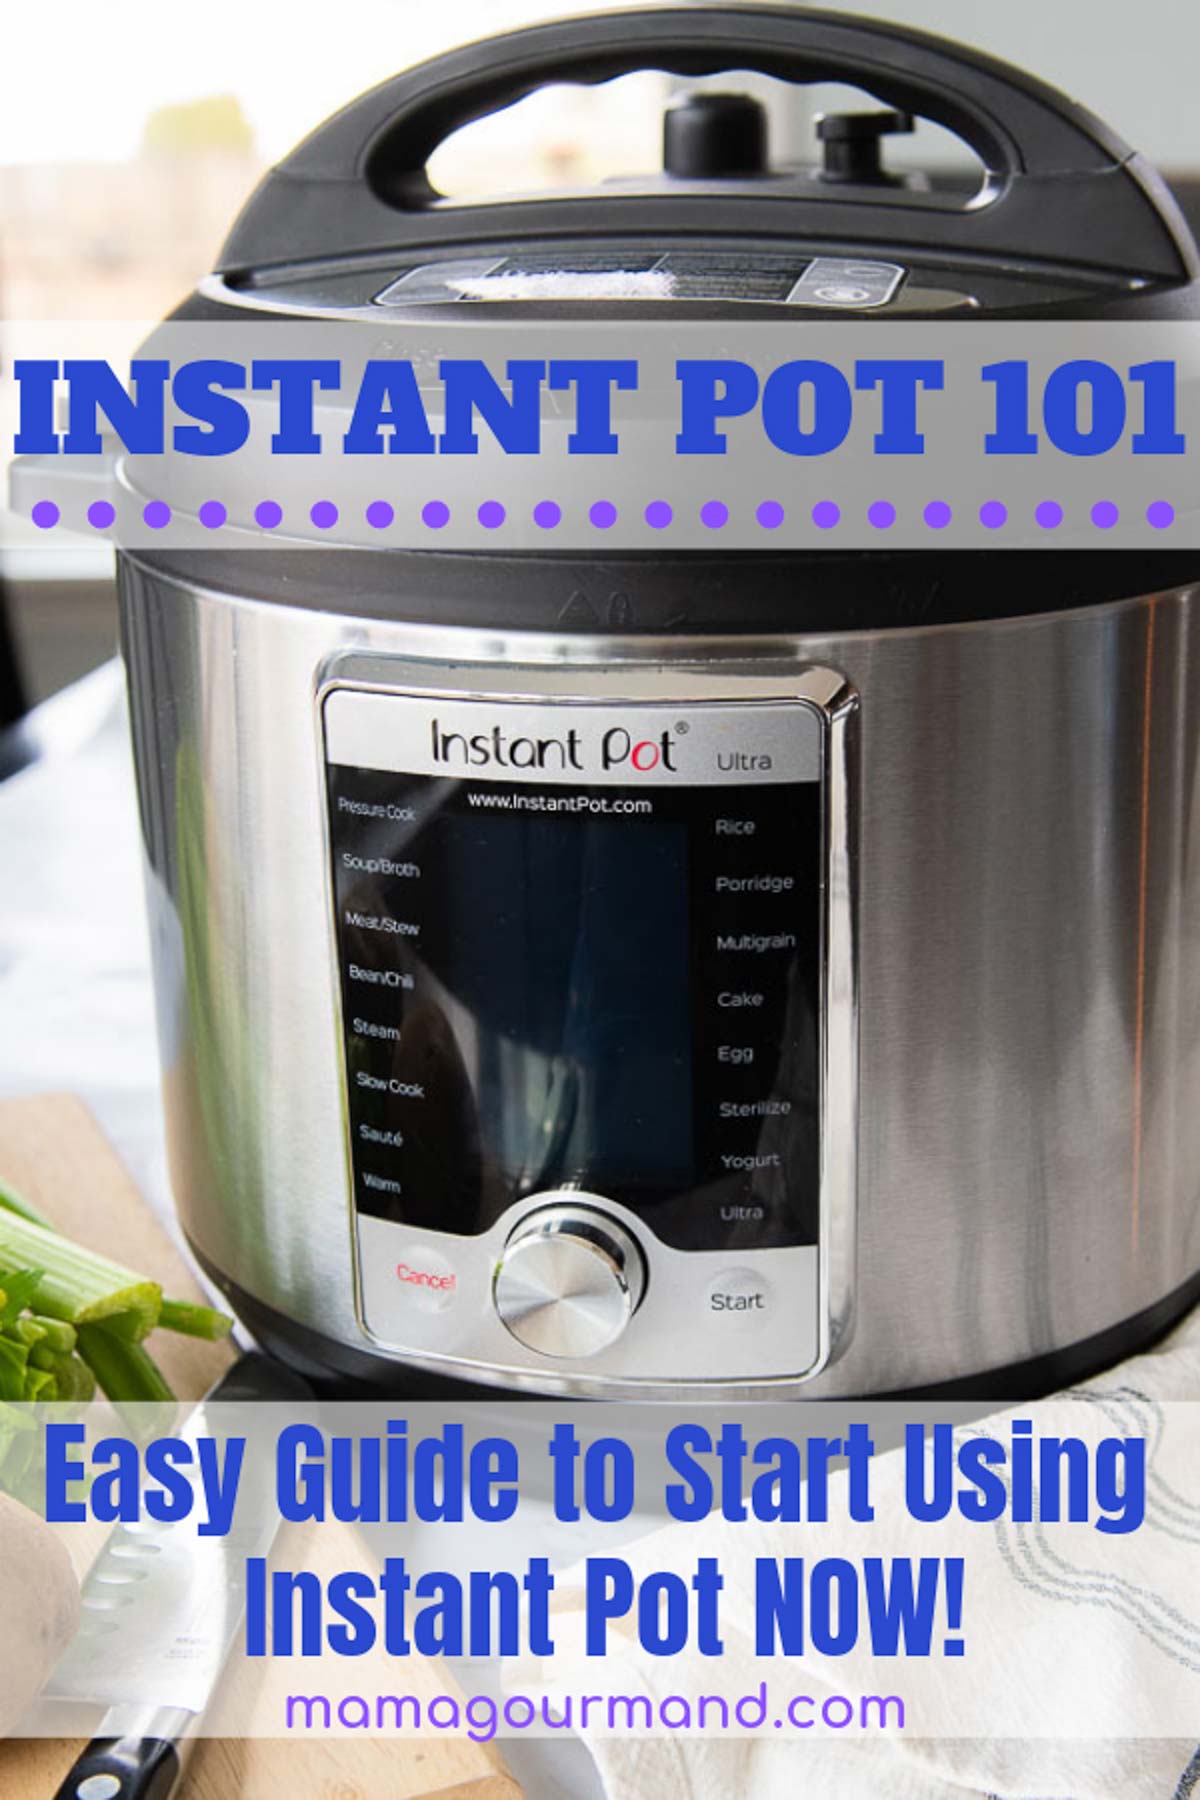 https://www.mamagourmand.com/wp-content/uploads/2019/04/how-to-use-an-instant-pot-1.jpg